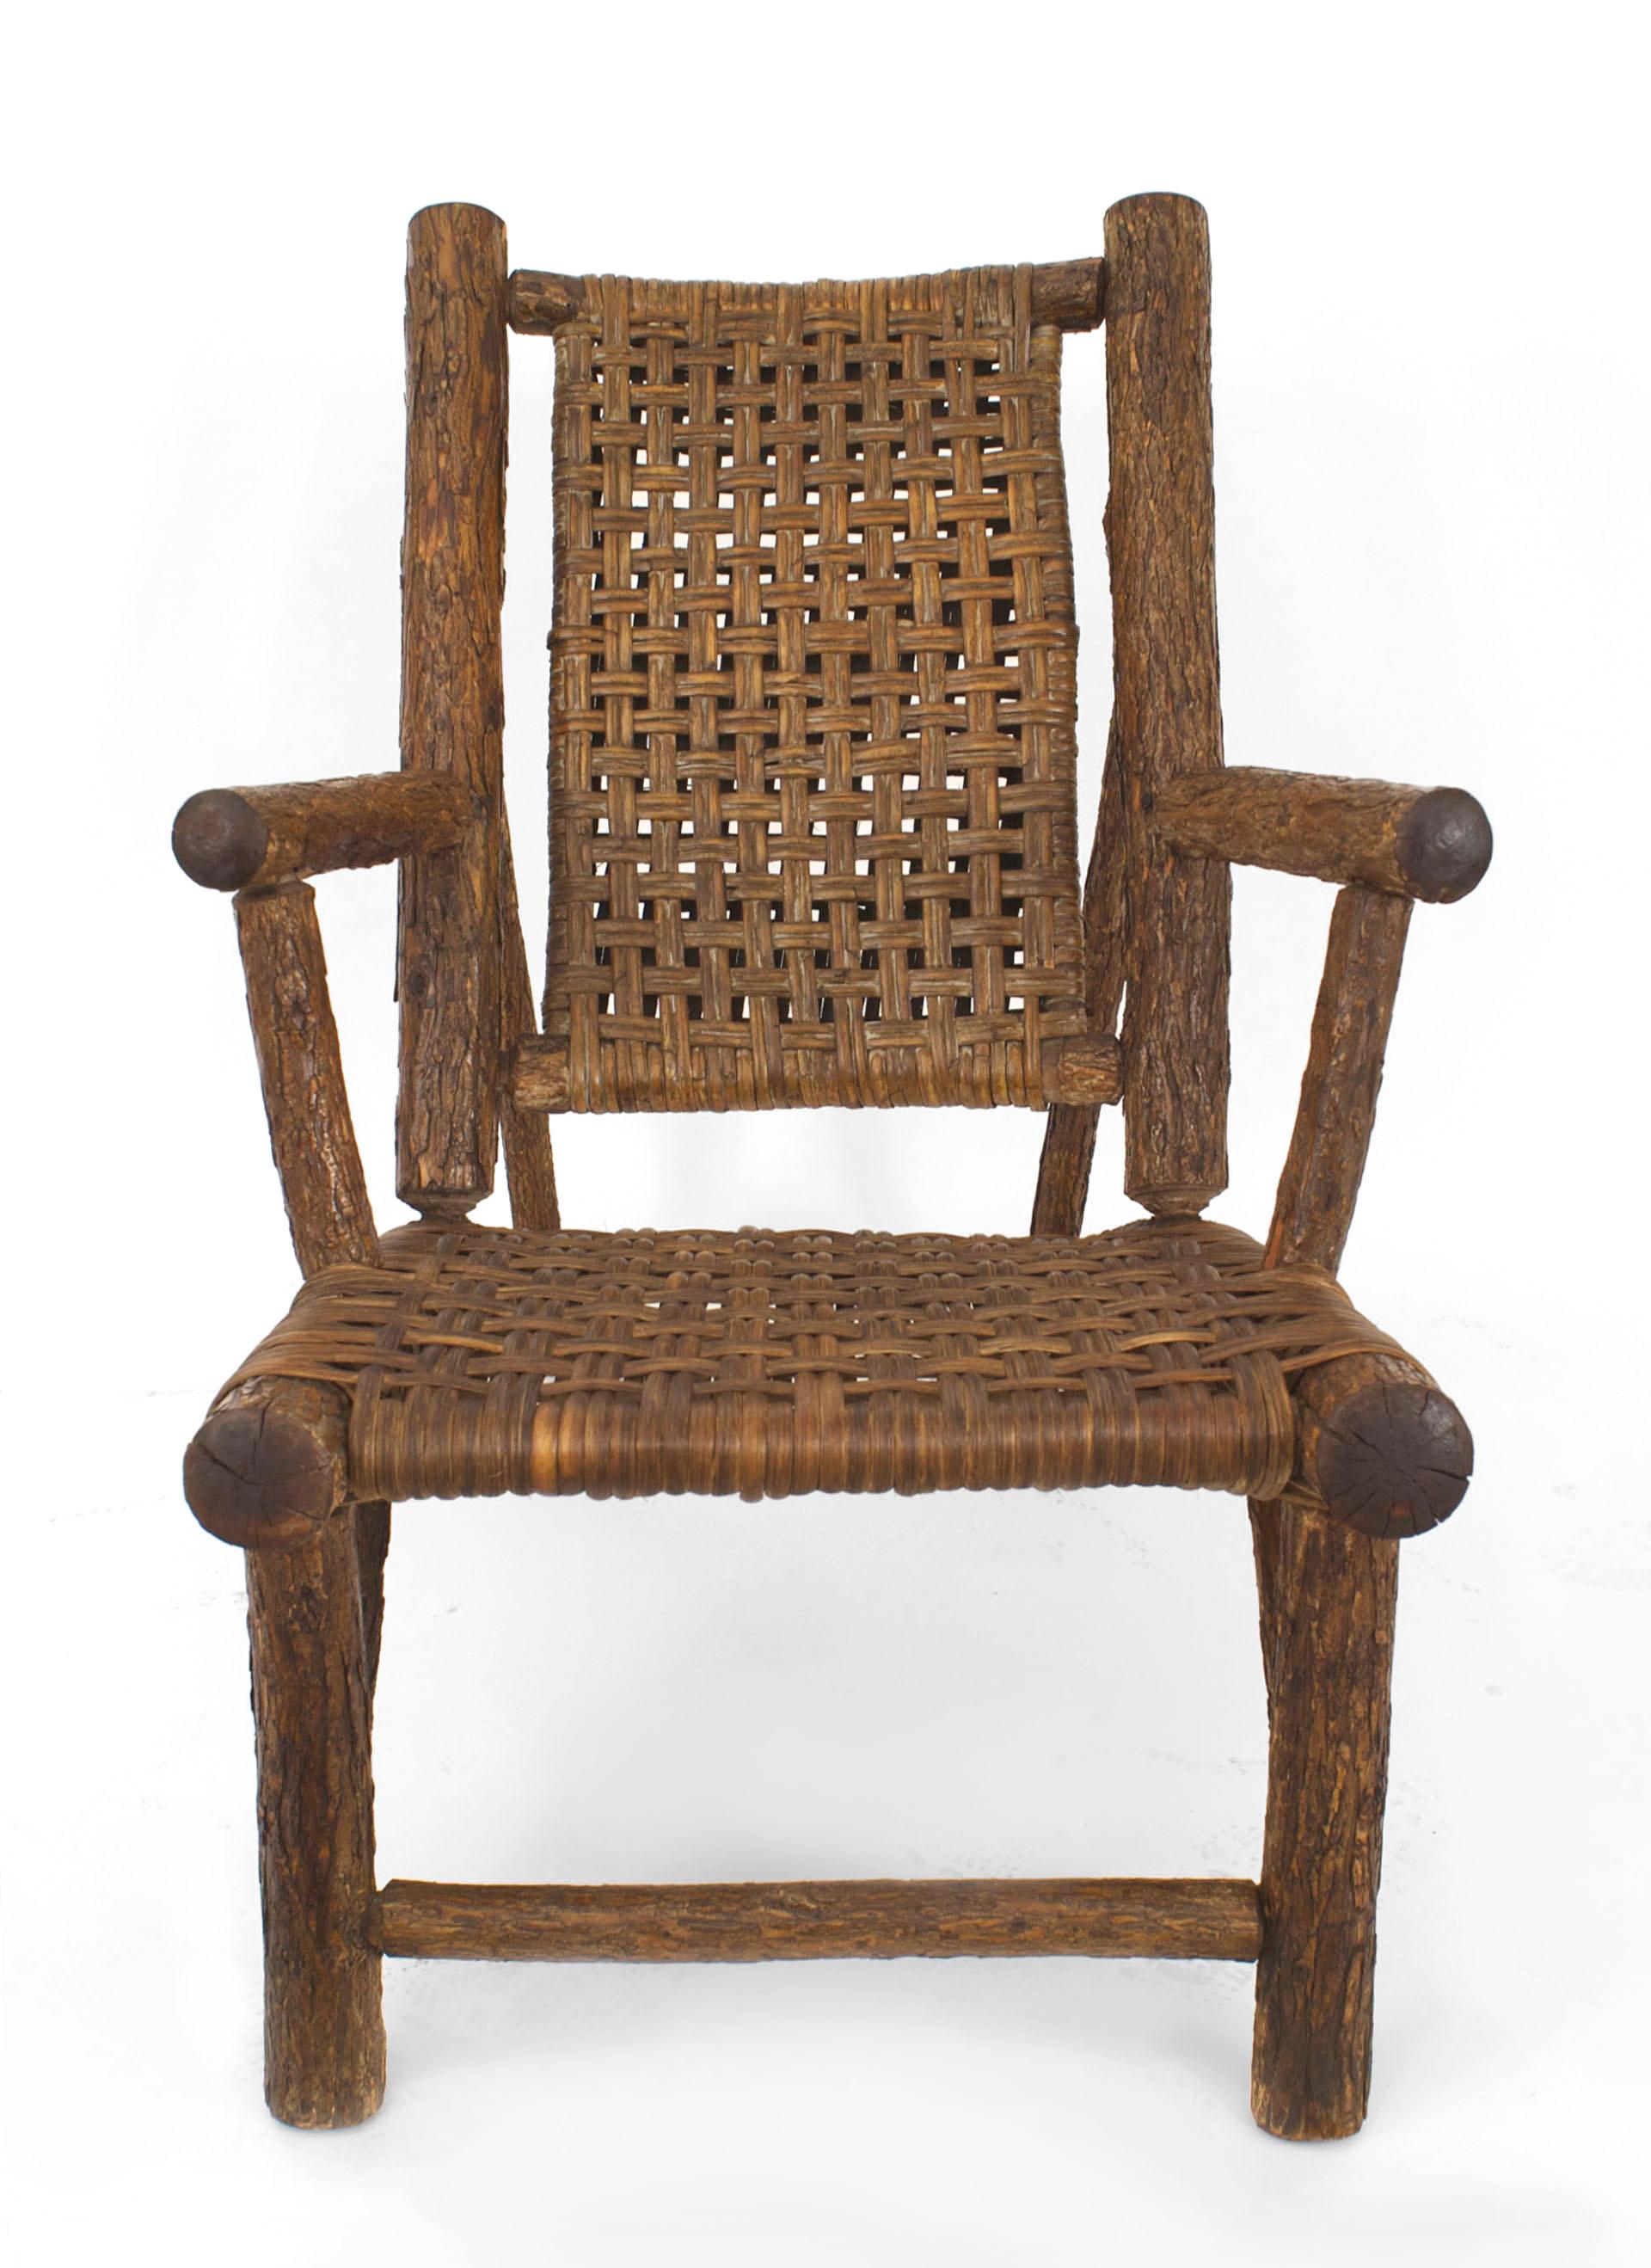 Pair of American Rustic Old Hickory style (1930s) low slung Armchairs with hickory wood frame and woven seat & back having a single matching foot stool (21